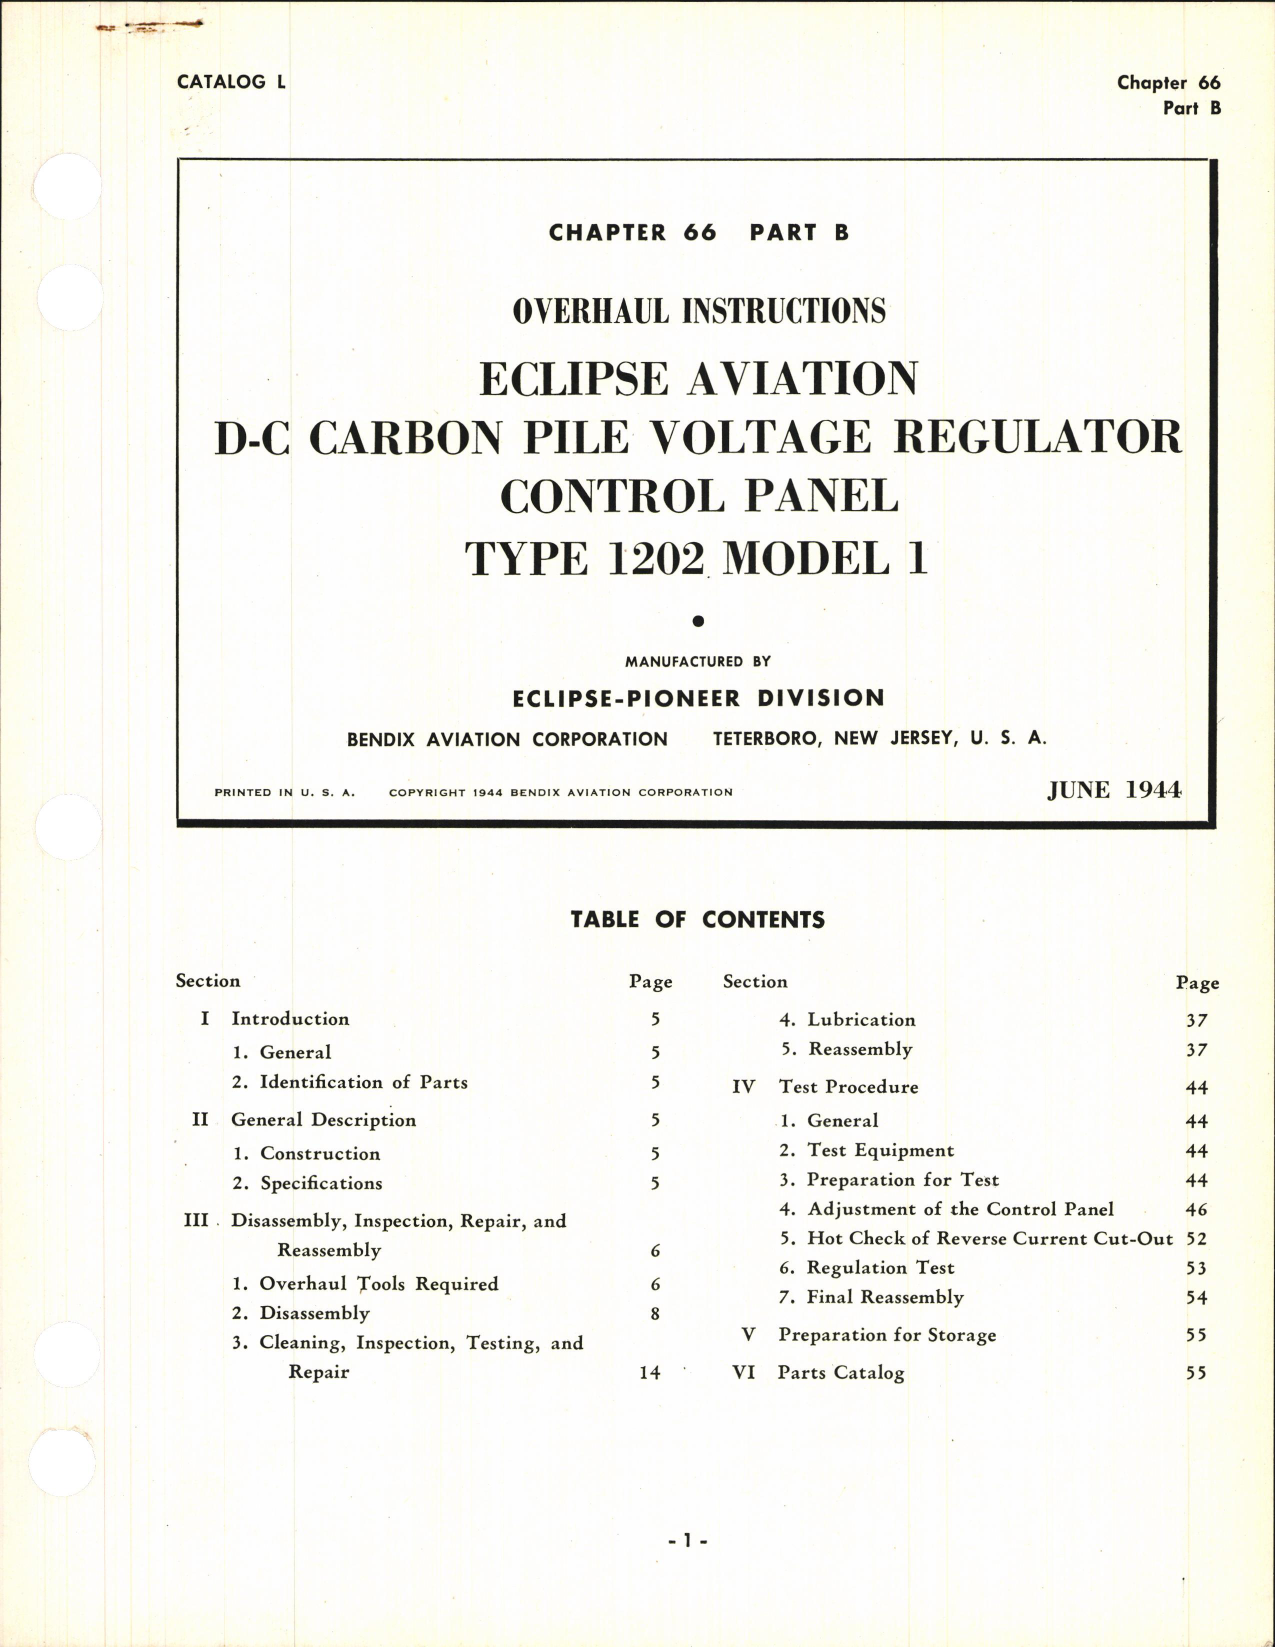 Sample page 1 from AirCorps Library document: Overhaul Instructions for D-C Carbon Pile Voltage Regulator Control Panel Type 1202 Model 1